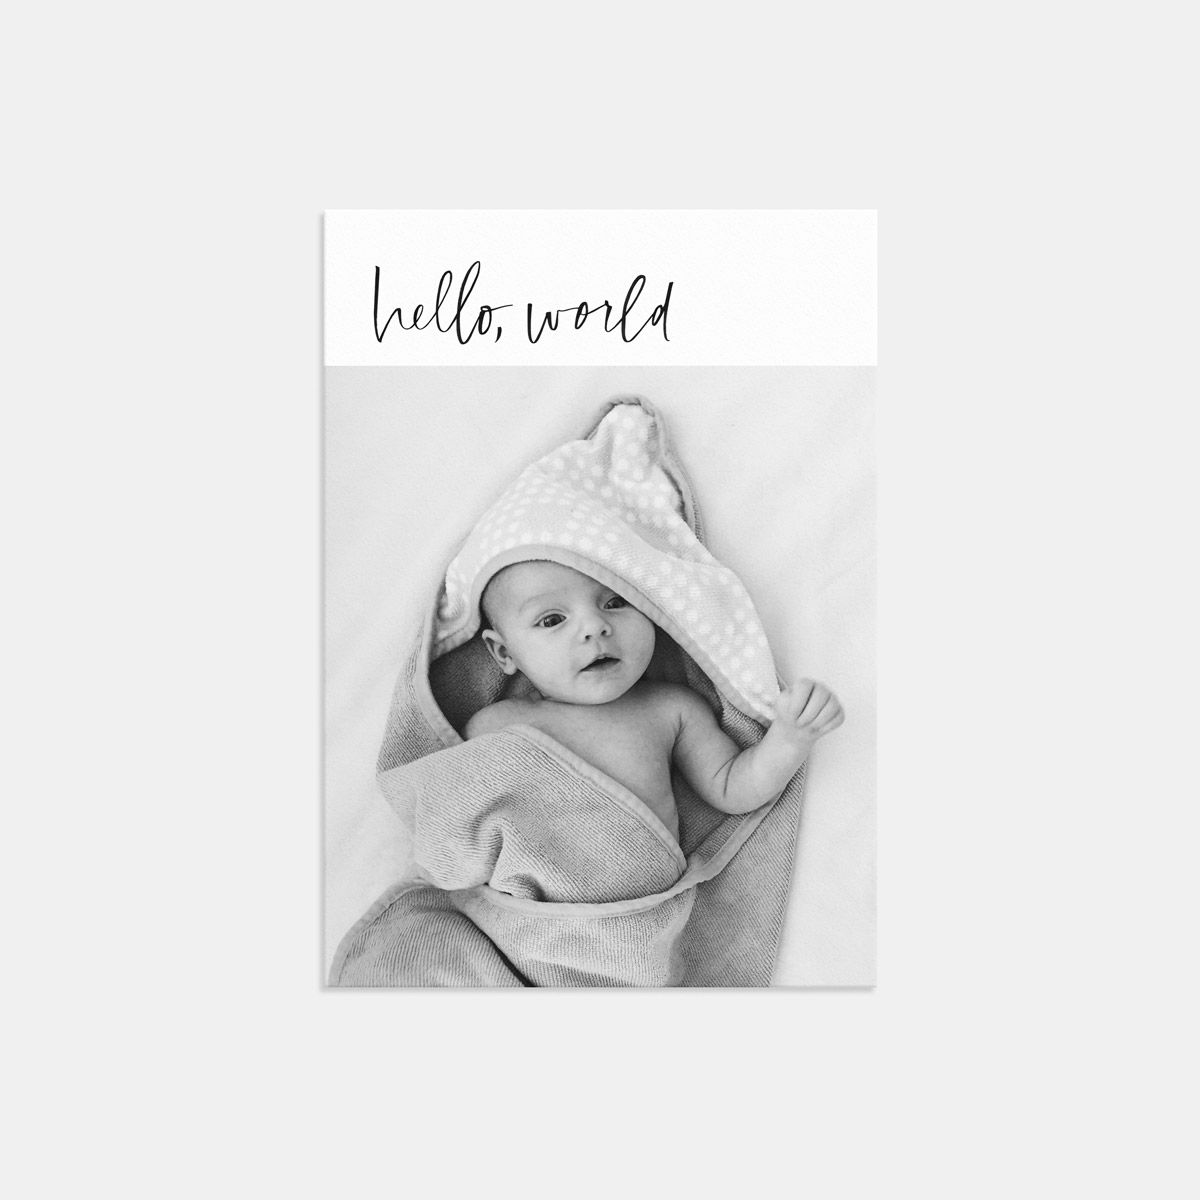 Shop Birth Announcement Photo Cards by Artifact Uprising | Cards